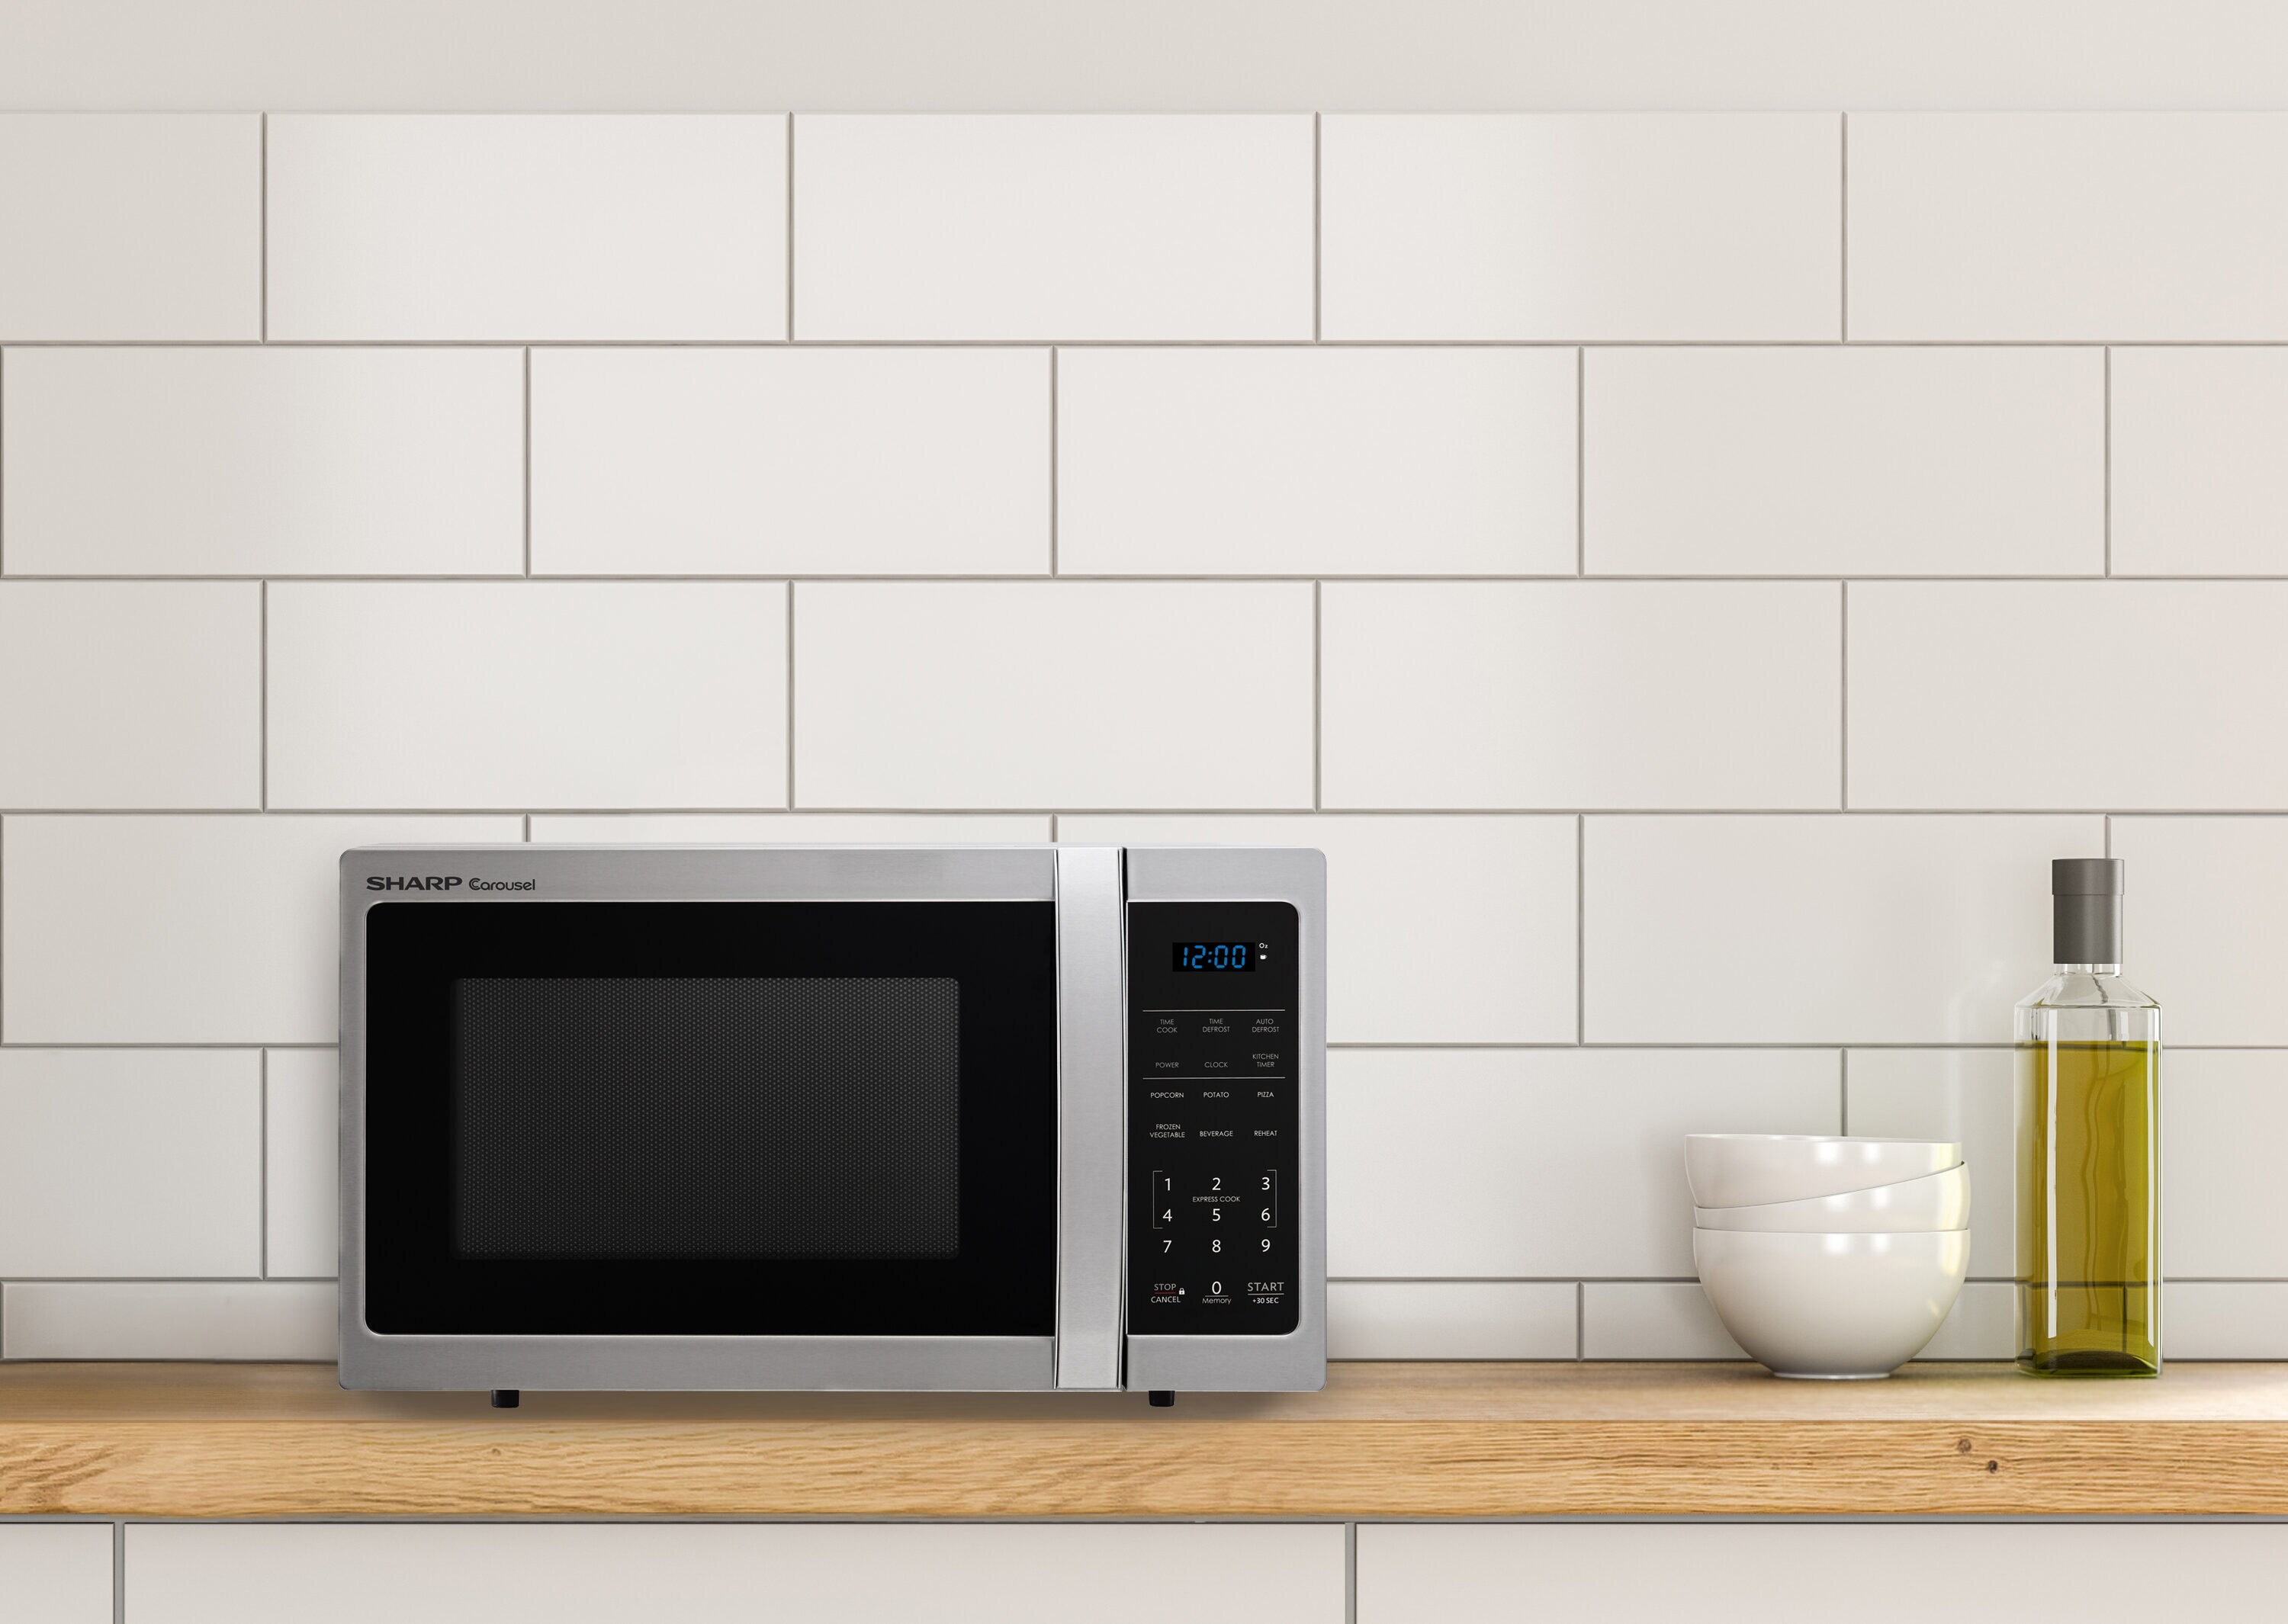 Countertop Micorwaves  Microwaves and Ovens at Lowe's